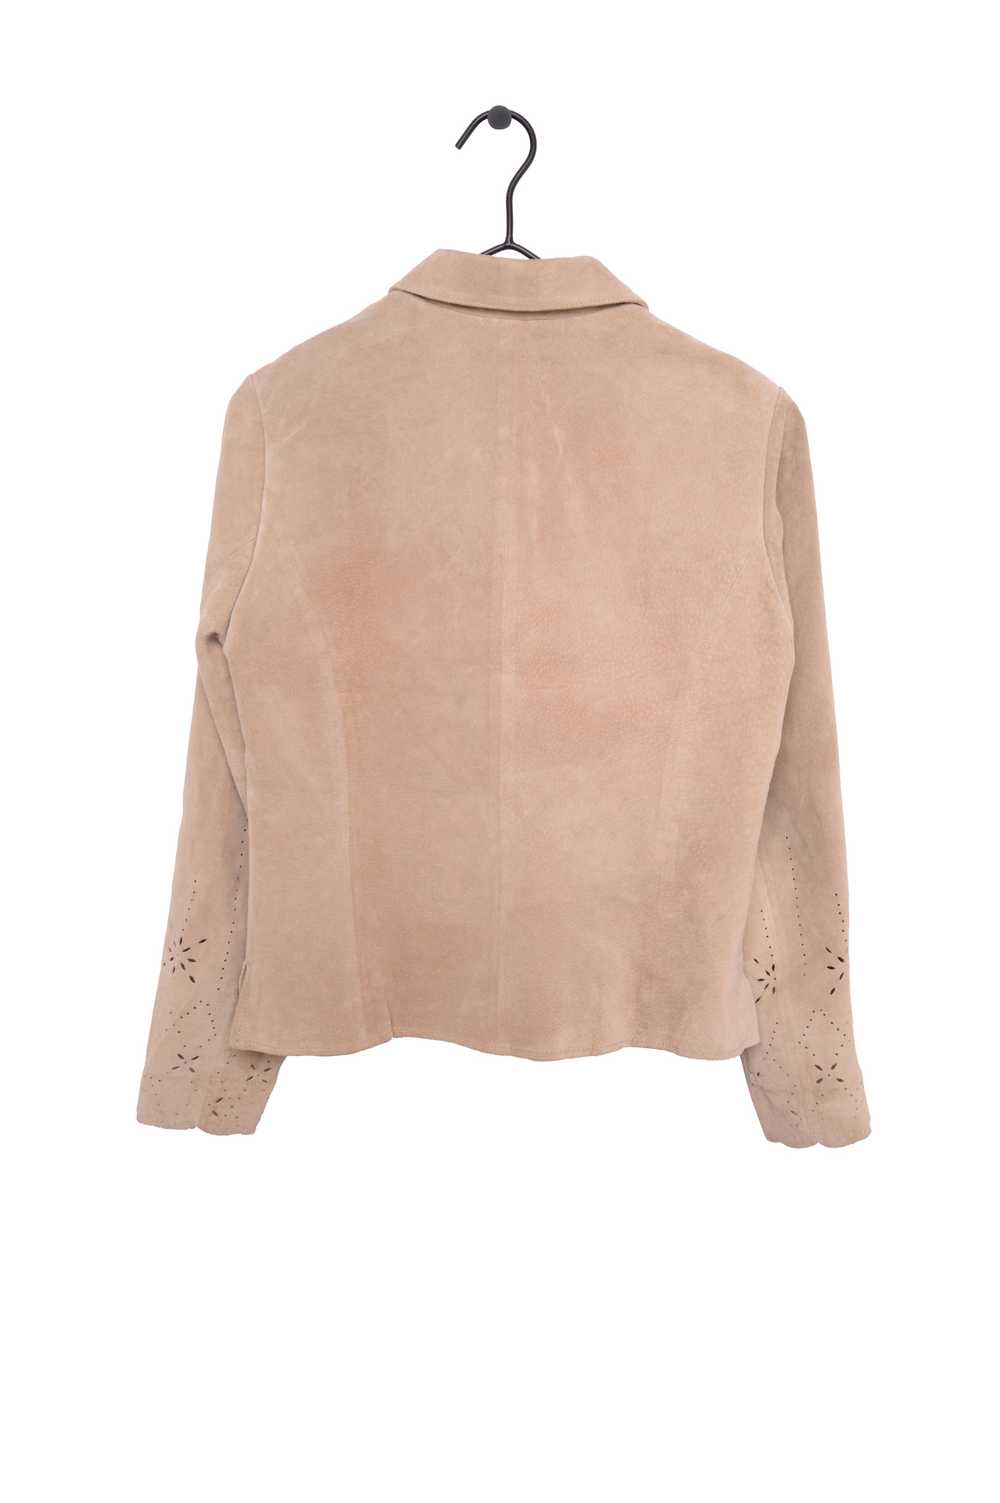 Suede Button Down Top - image 3